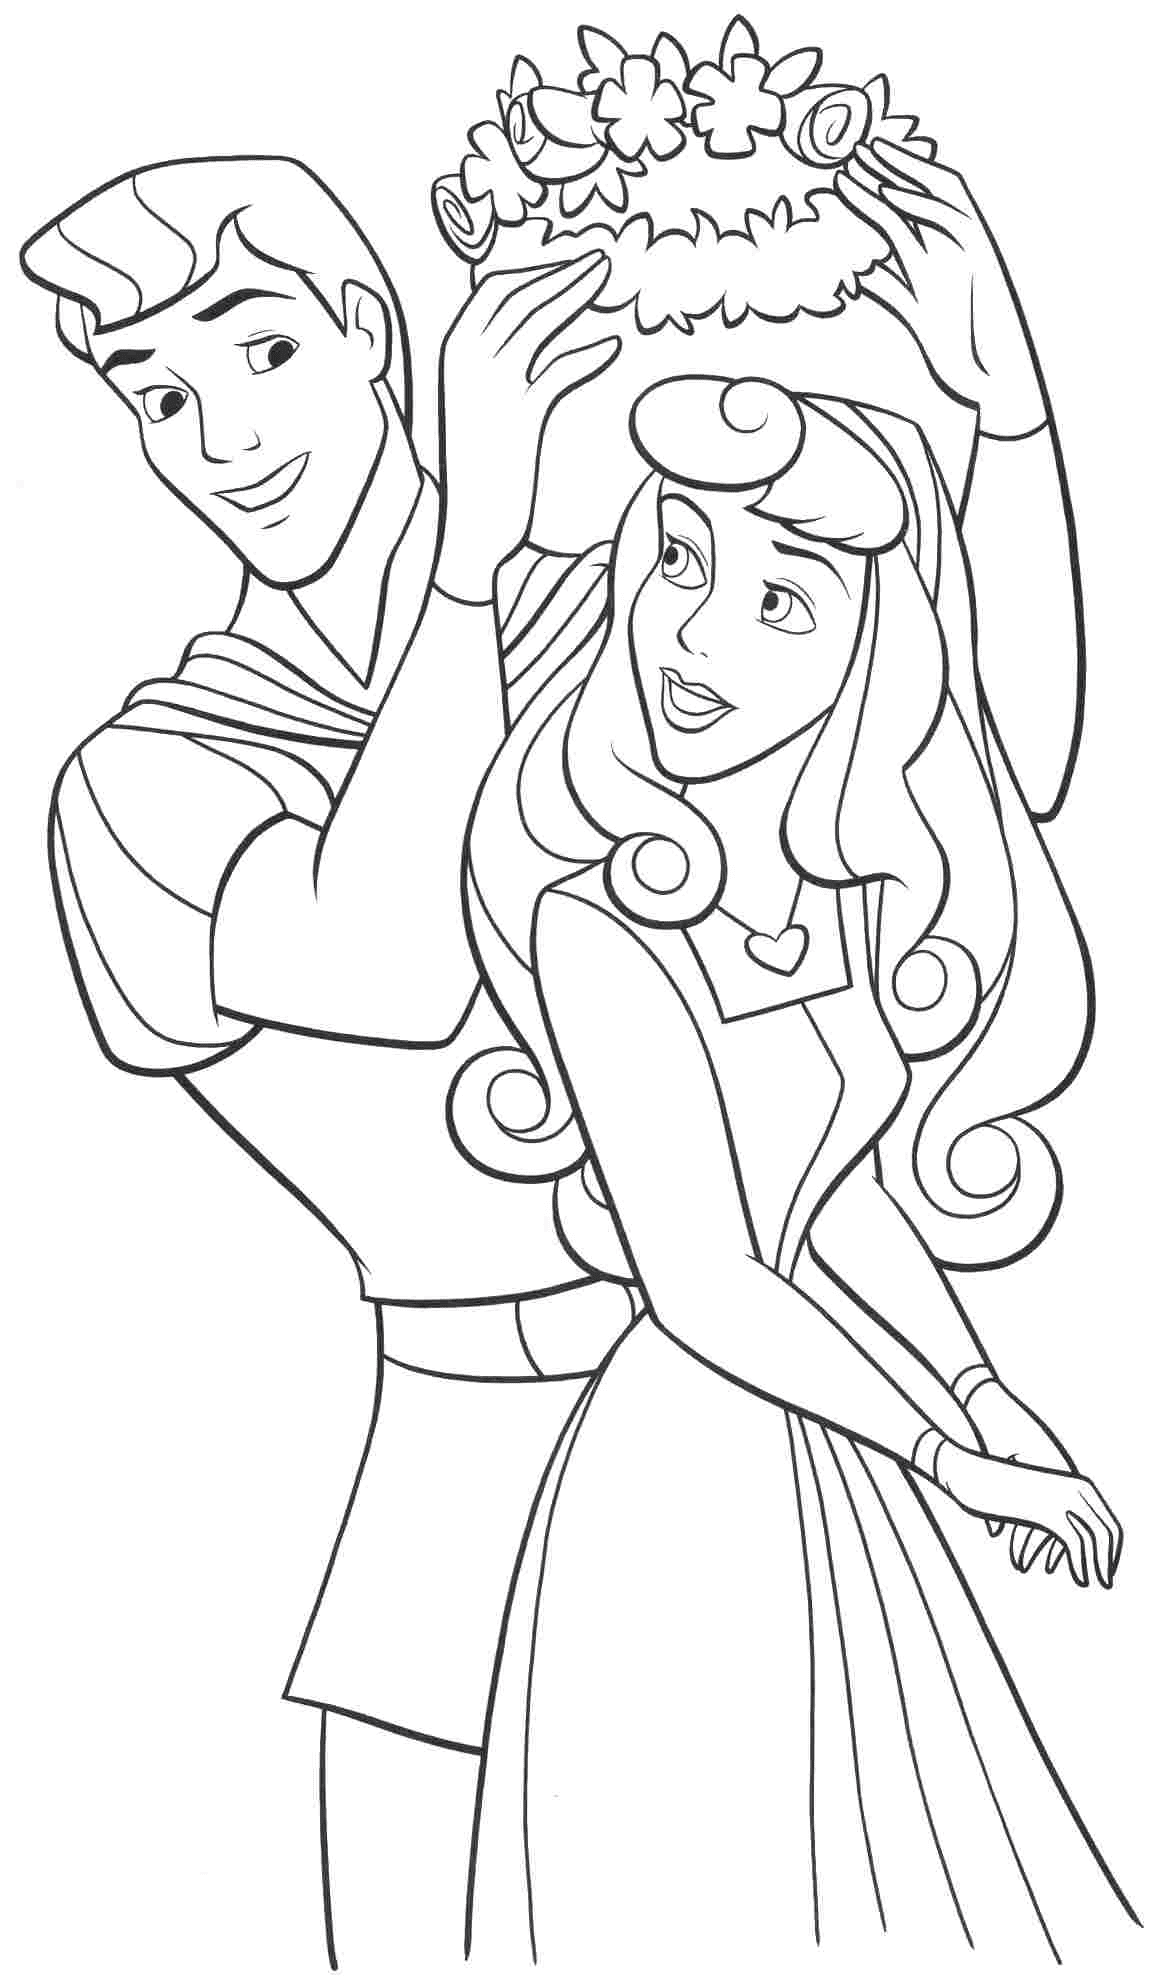 Phillip Wears A Wreath Of Flowers On Aurora's Head Coloring Pages